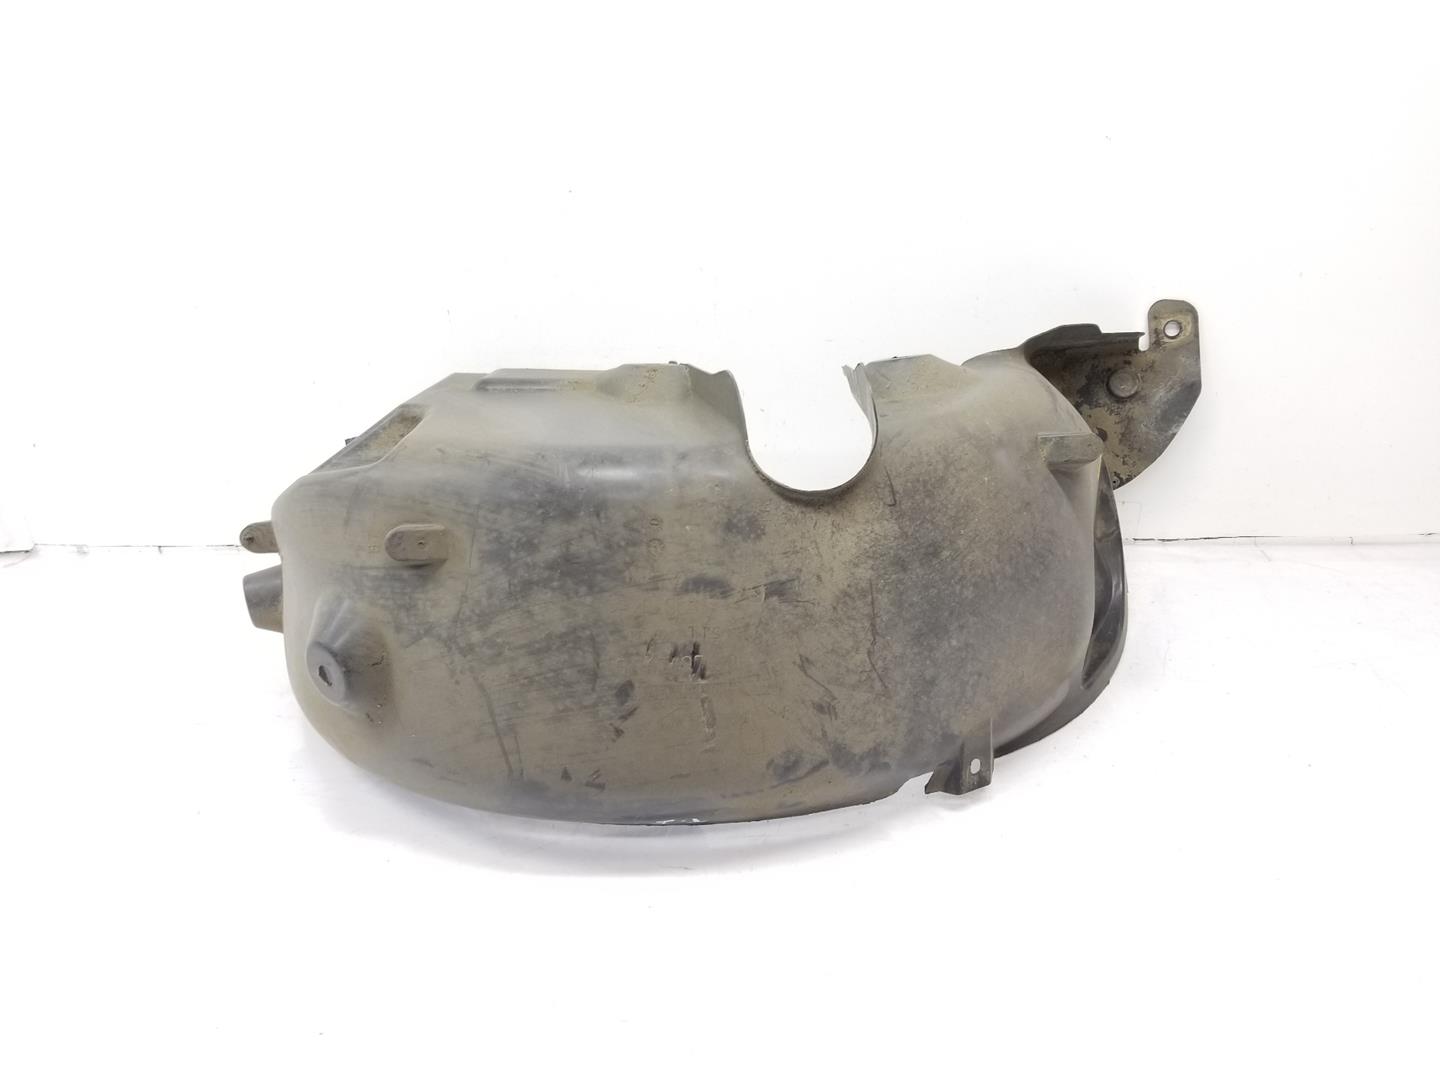 RENAULT Clio 3 generation (2005-2012) Other Body Parts 767497618R, 767497618R 22740470